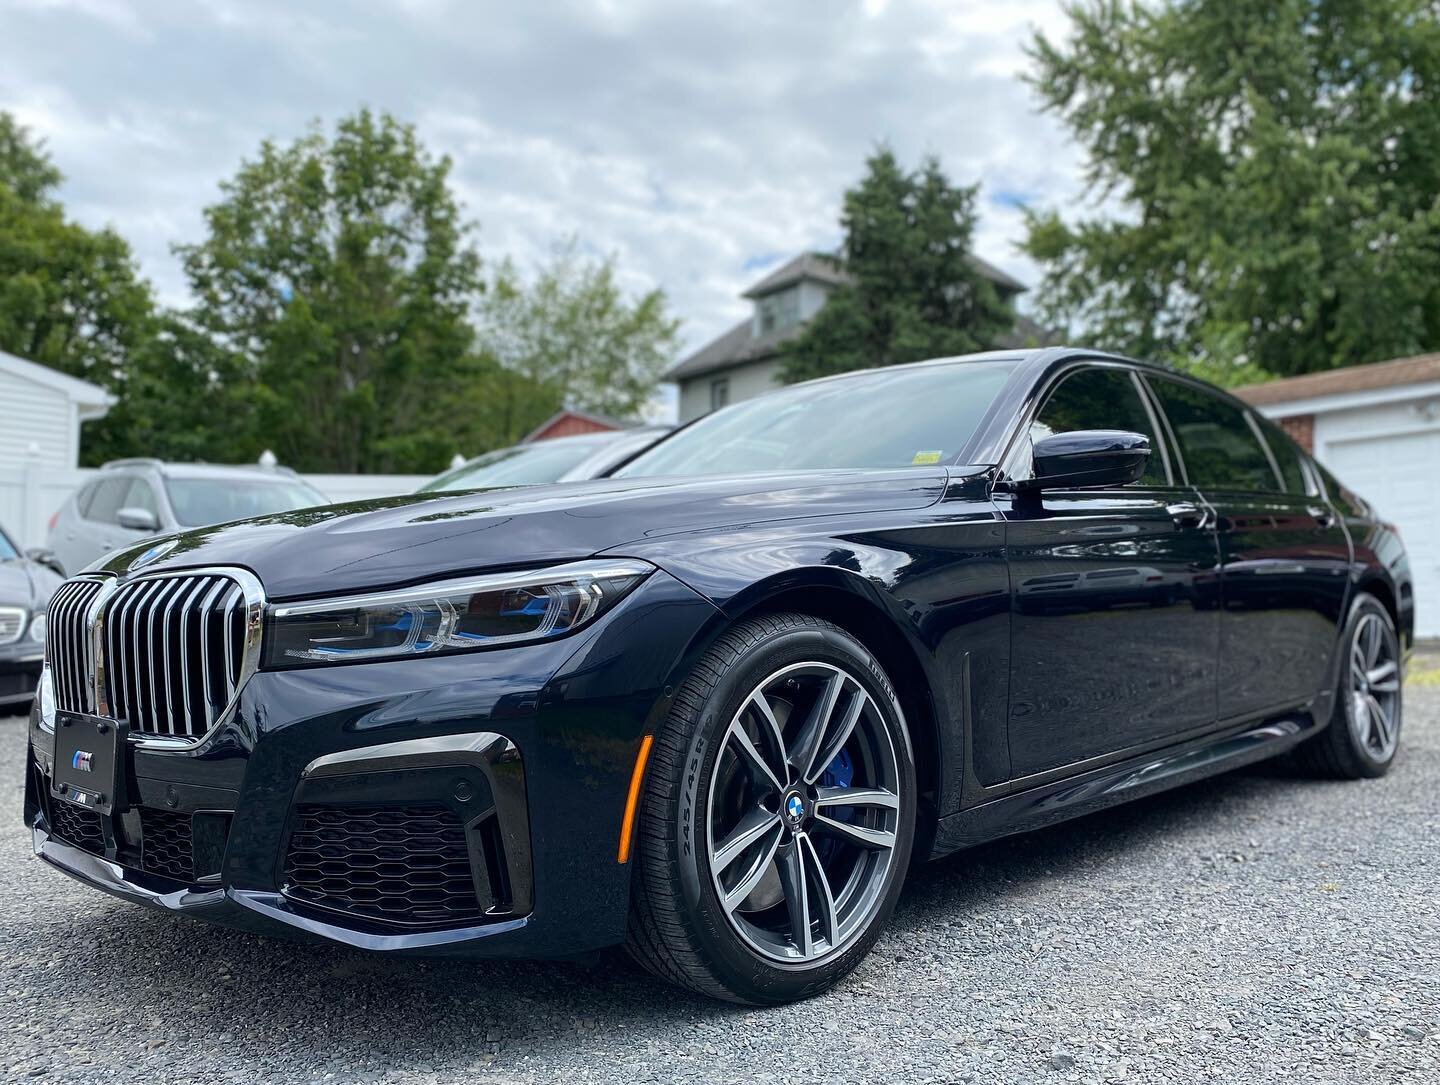 BMW 750I - Level 2 Paint Correction, @iglcoatings Quartz 2-Year Paint Coating, KENZO Industrial on wheels and brakes, as well as 50% Ceramic Tint all around. 
➖➖➖➖➖➖➖➖➖
#detailing #paintcorrection #paintpolishing #ceramiccoating #ceramiccoatings #igl